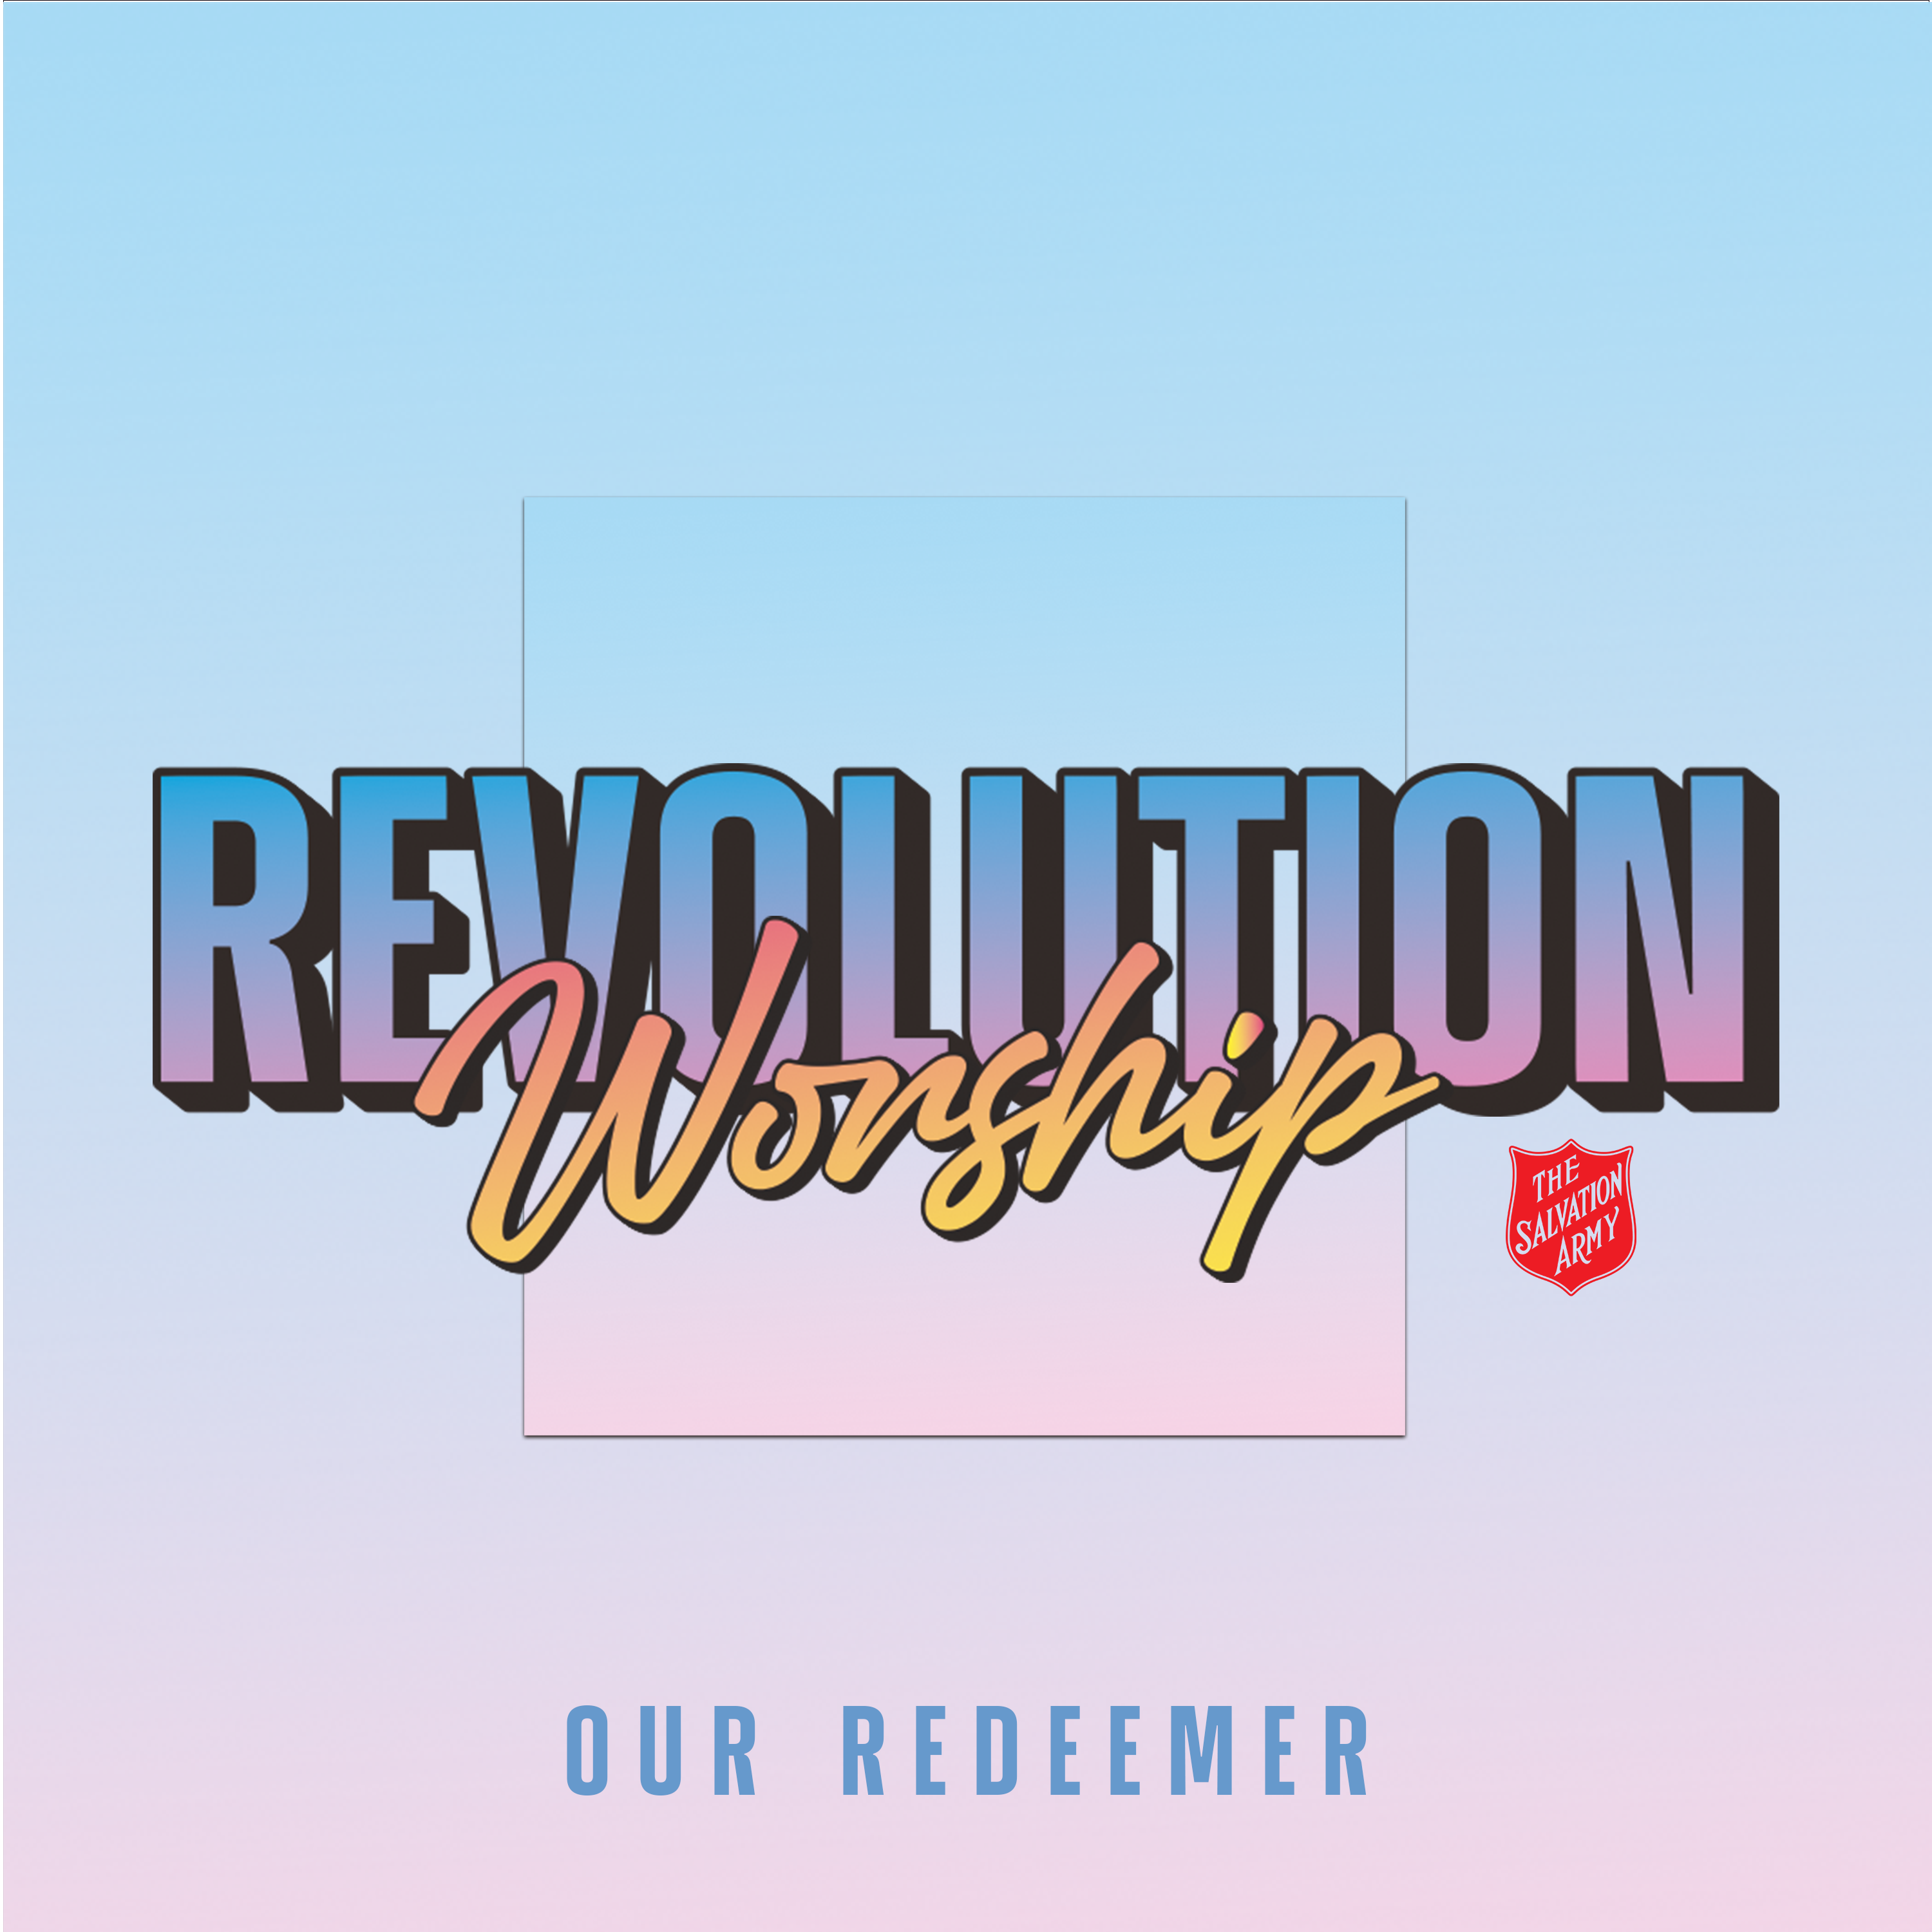 Our Redeemer